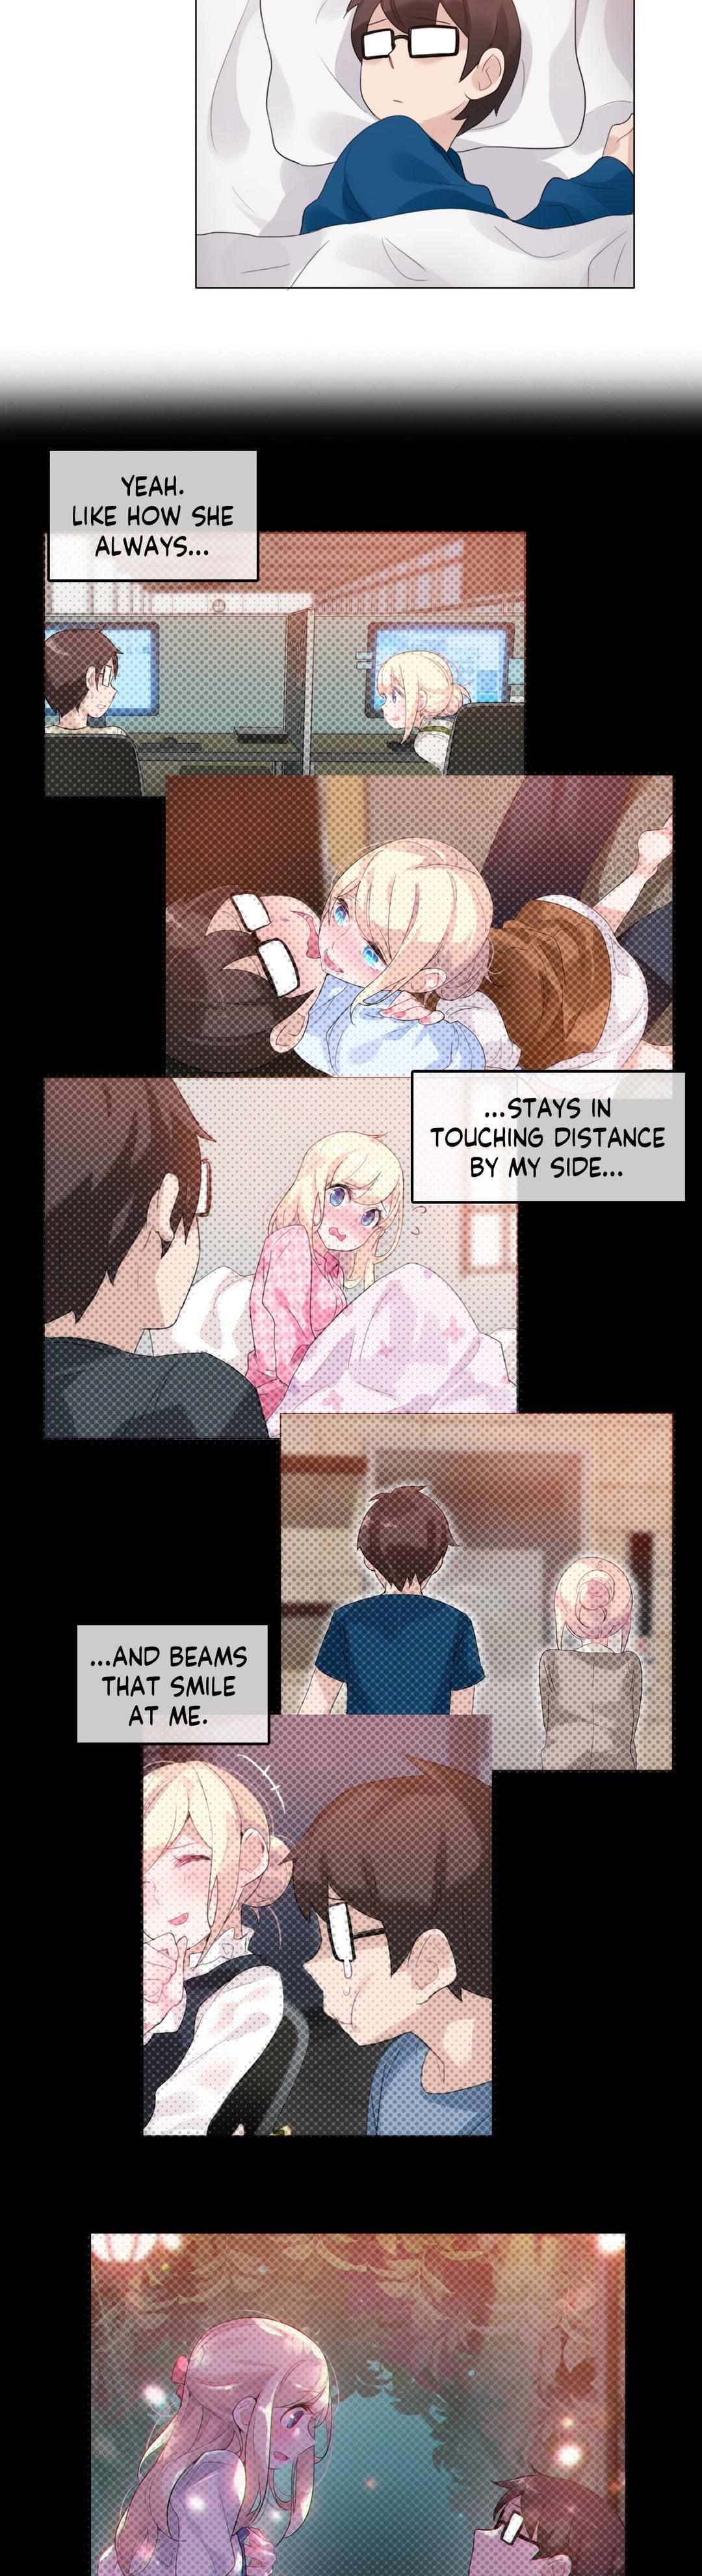 A Pervert's Daily Life • Chapter 51-55 37